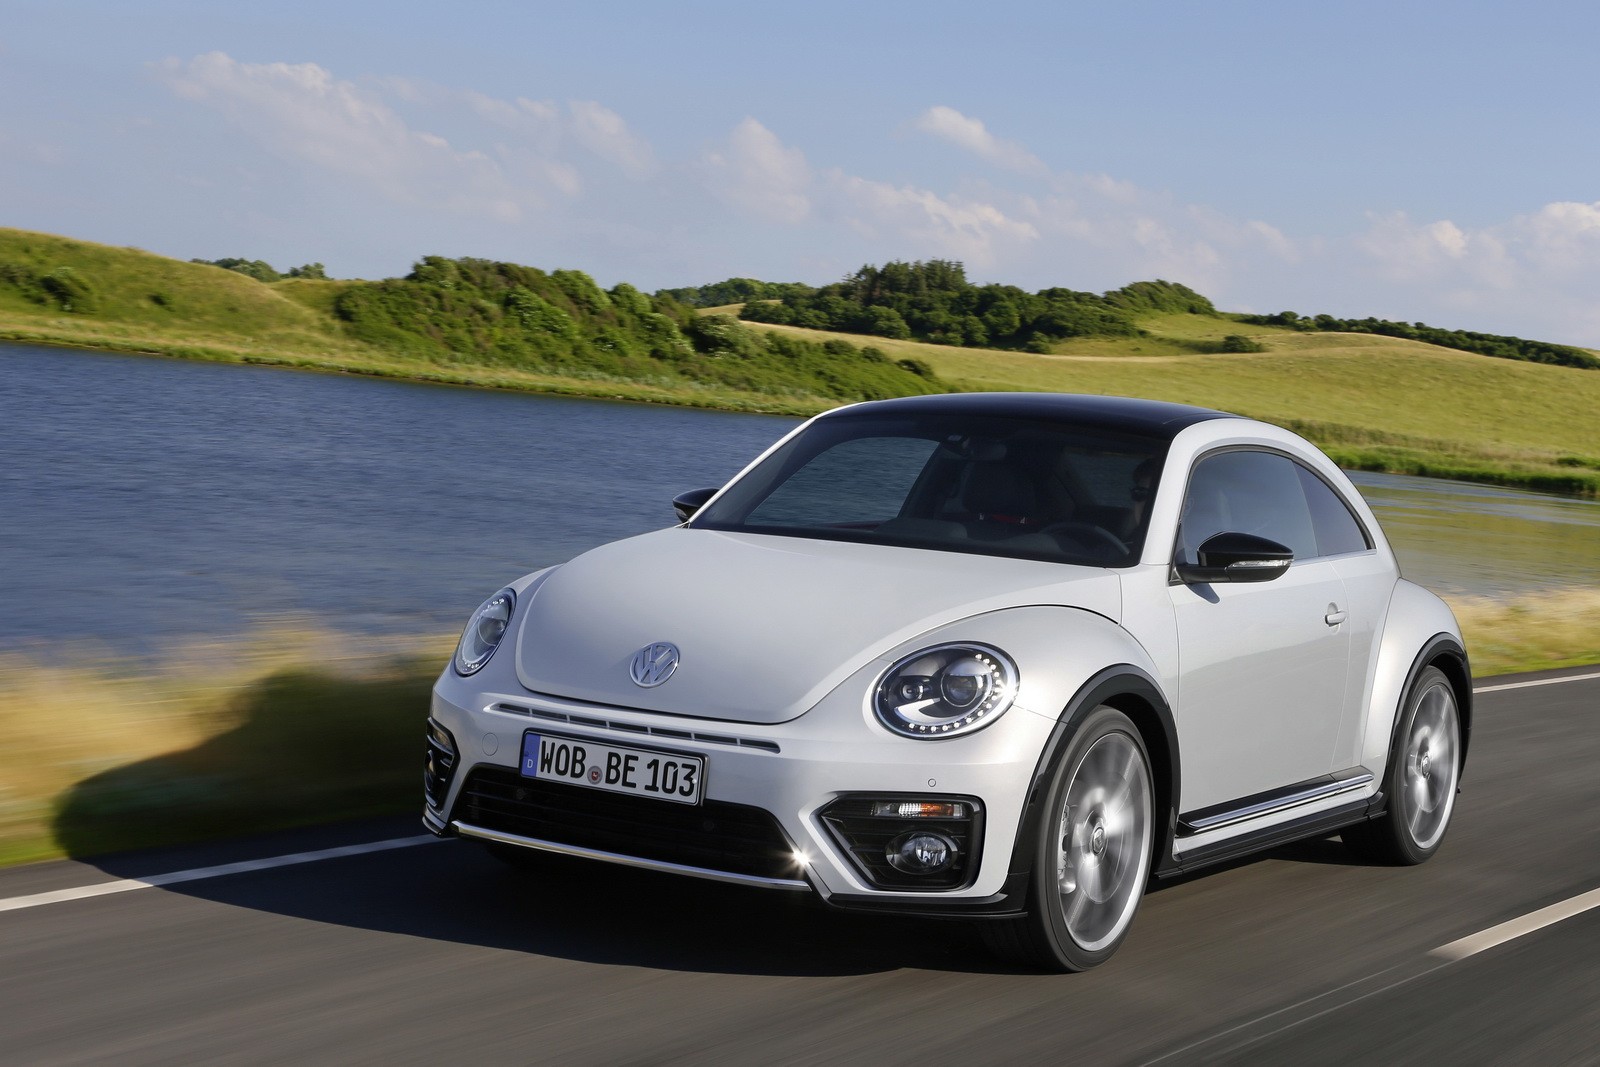 2017 Volkswagen Beetle Detailed in New Photos and Videos - autoevolution